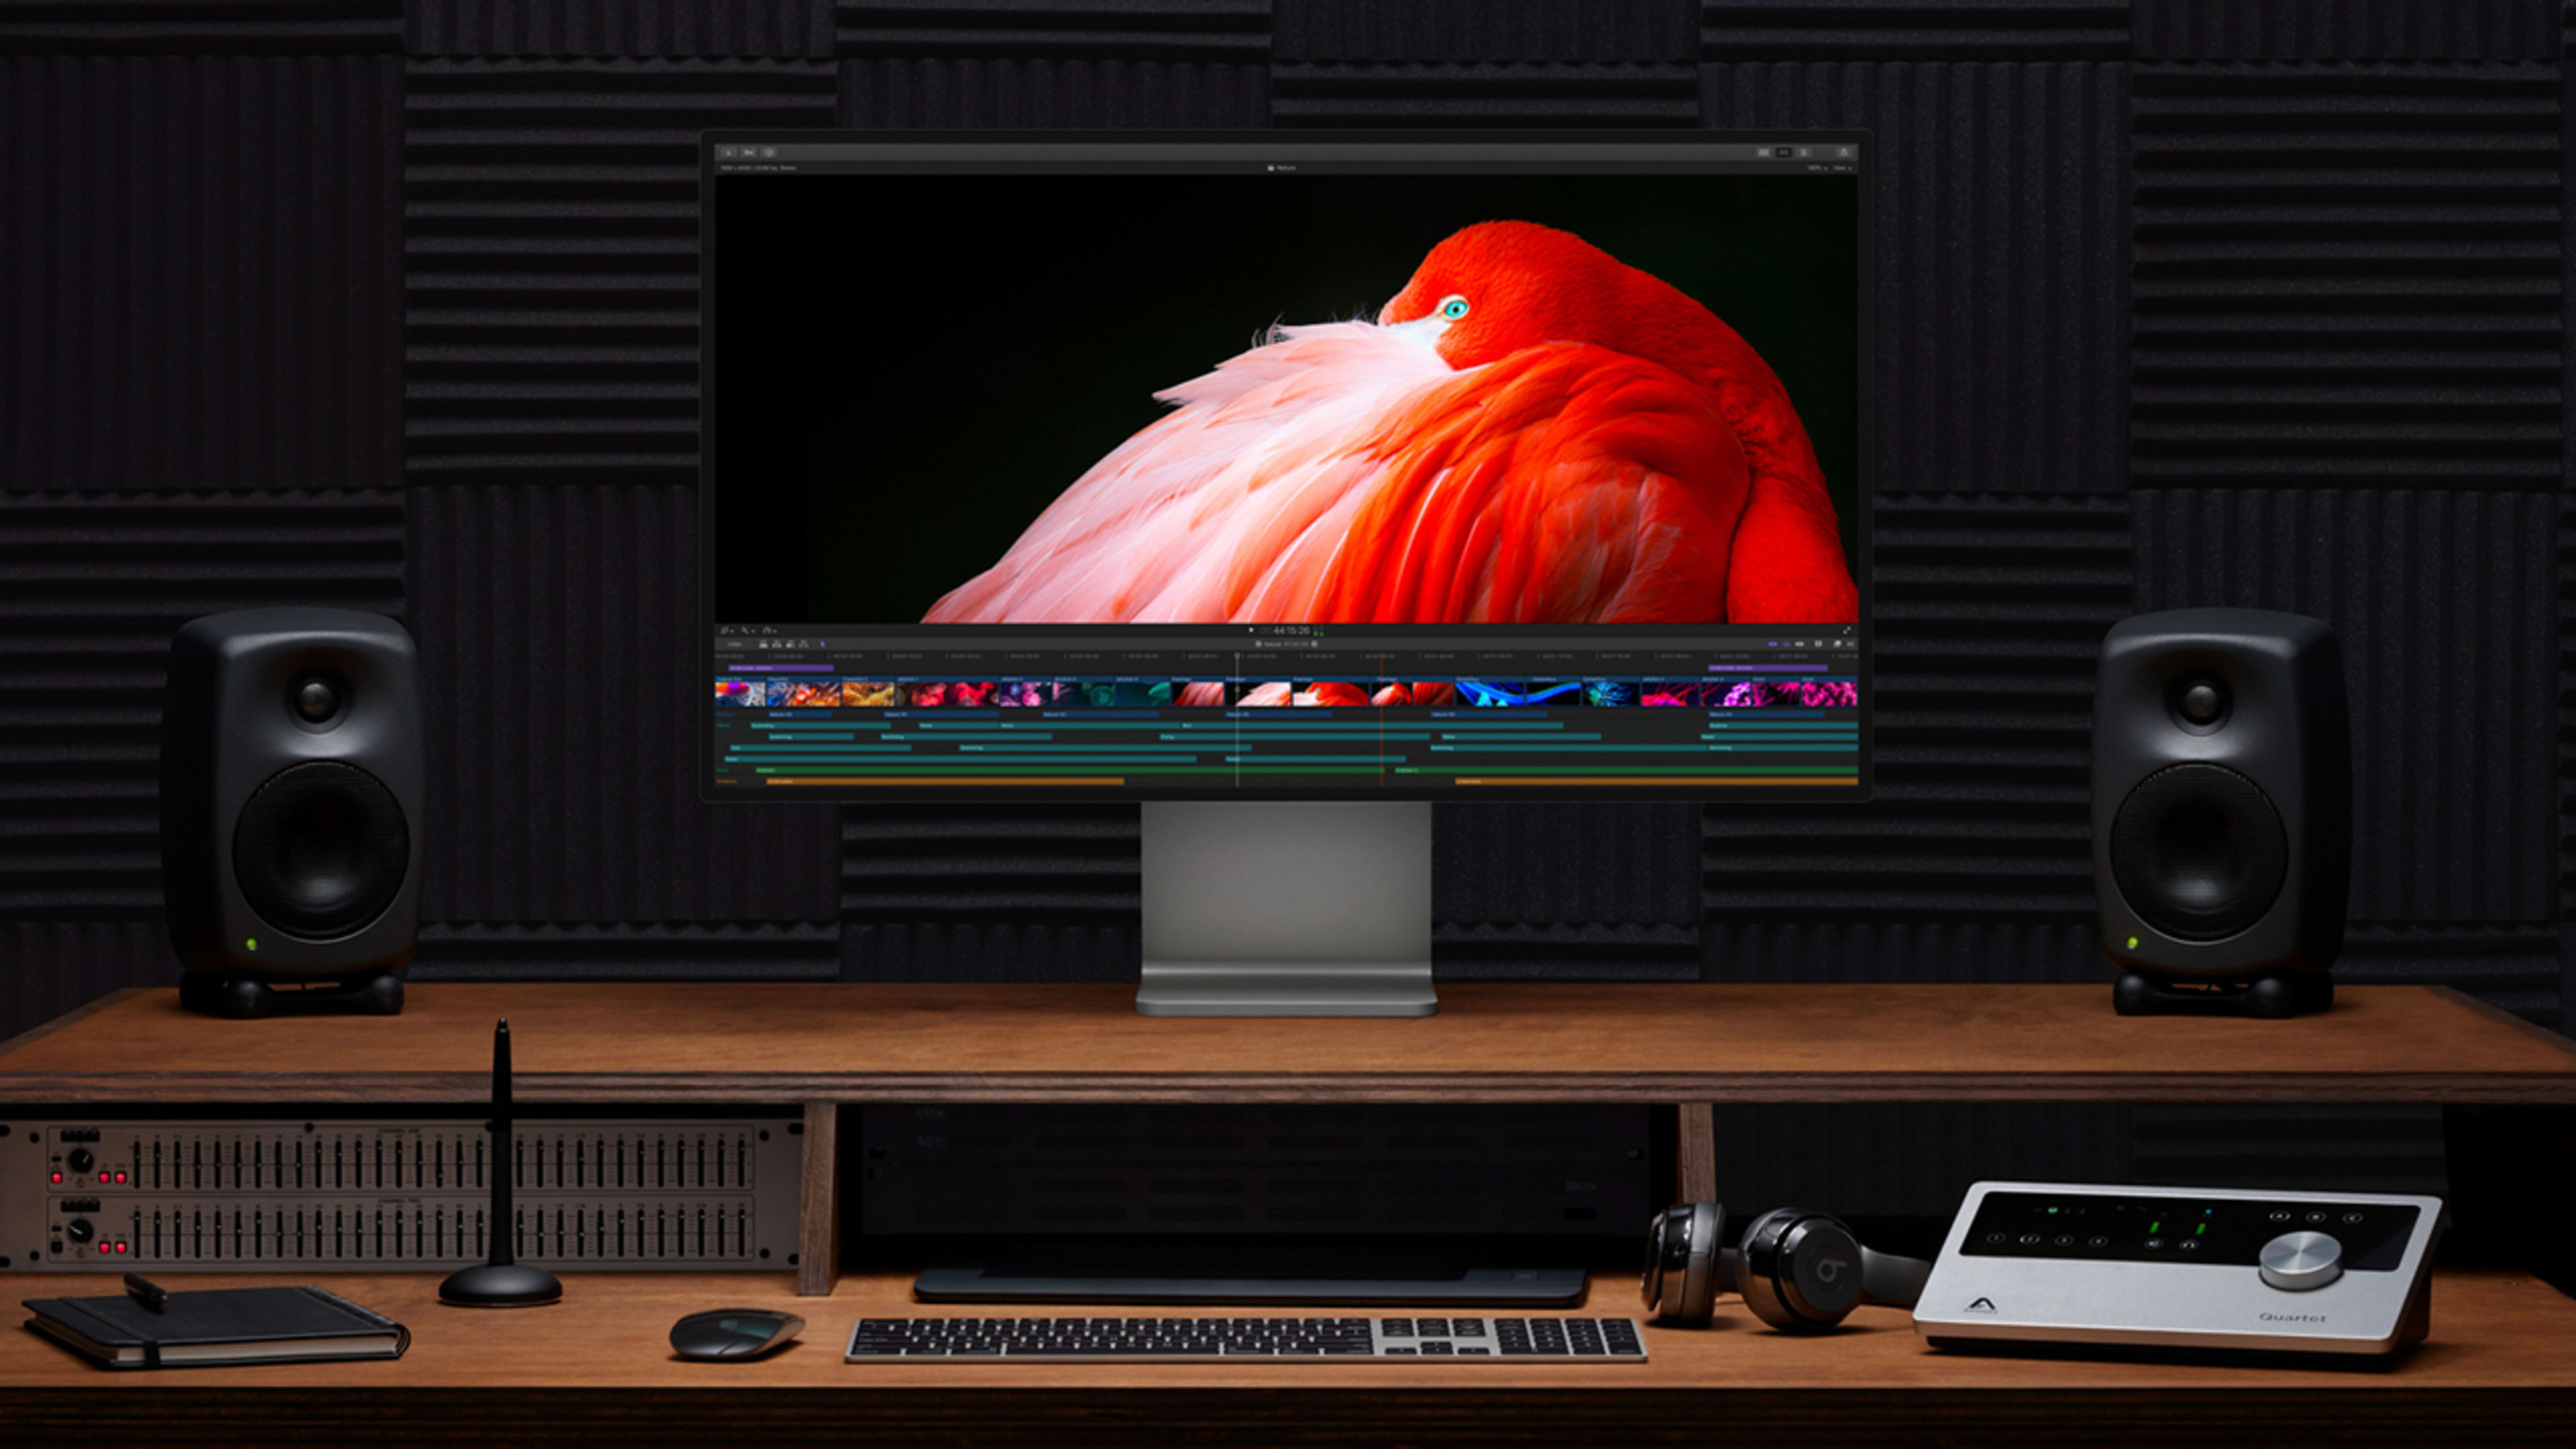 Apple teases a new Mac Pro with insane computing chops and upgradeable parts